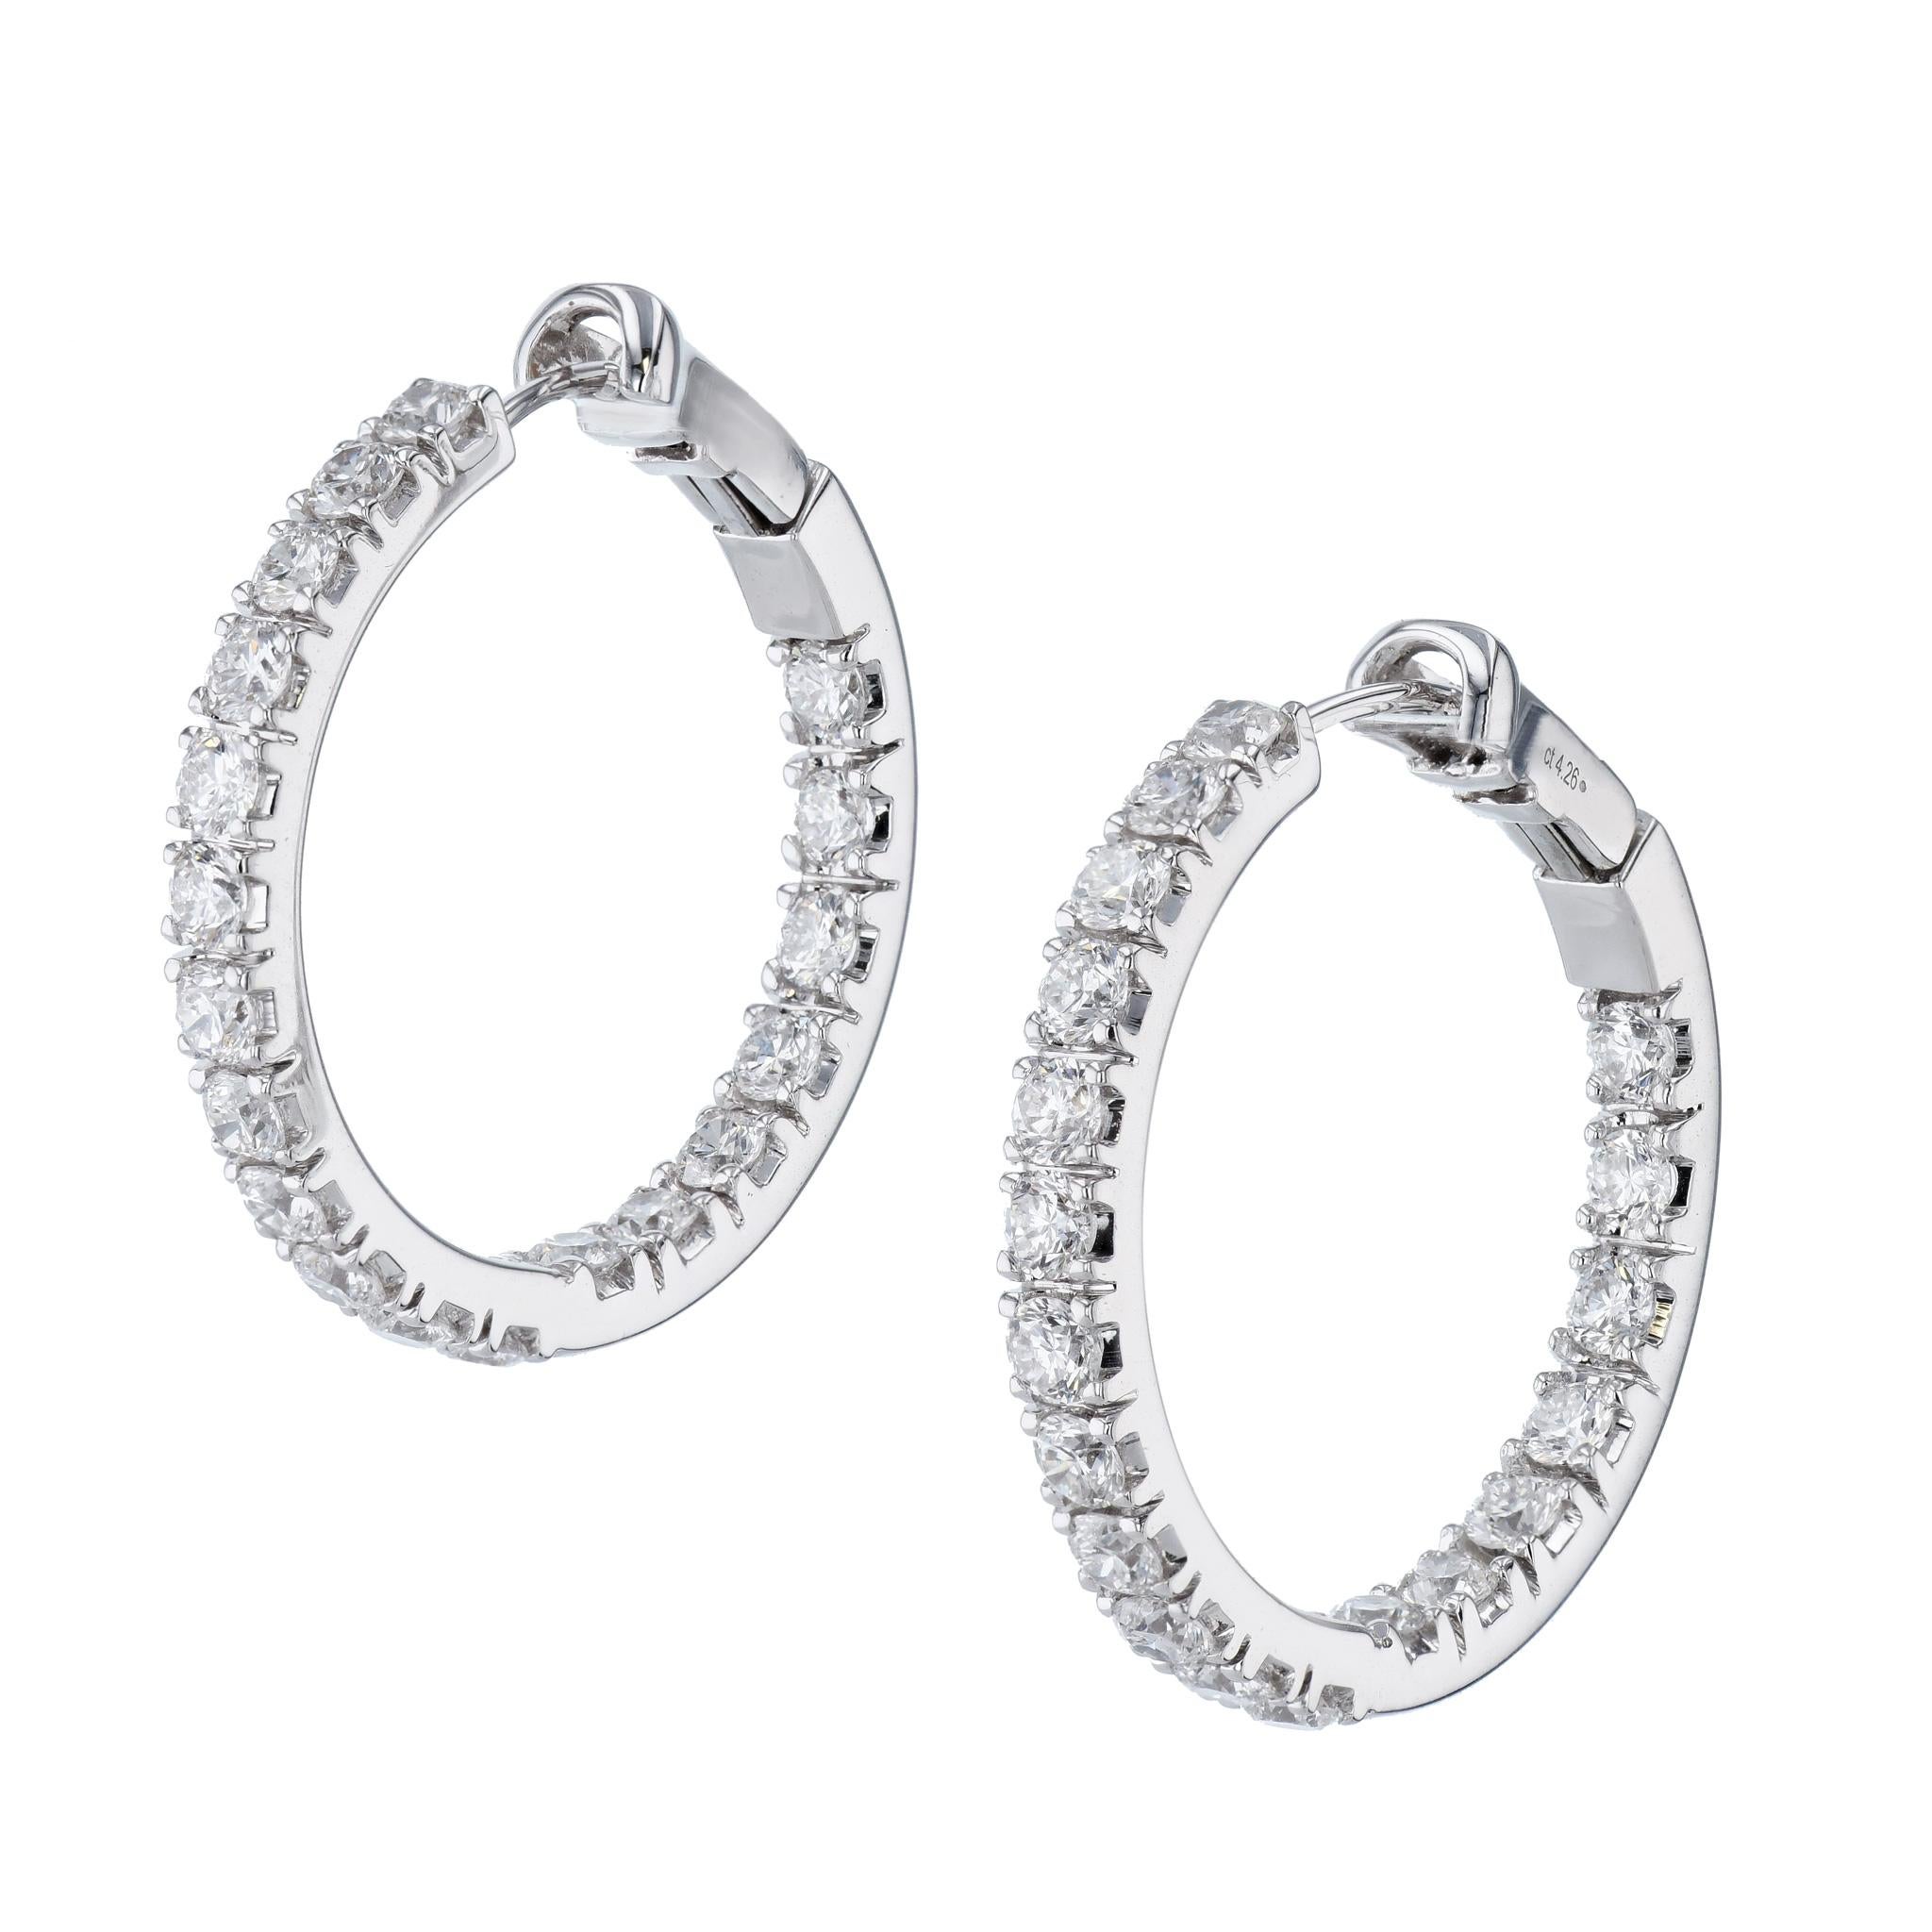 4.26 Carat Diamond 18 Karat White Gold Hoop Earrings  In New Condition For Sale In Miami, FL